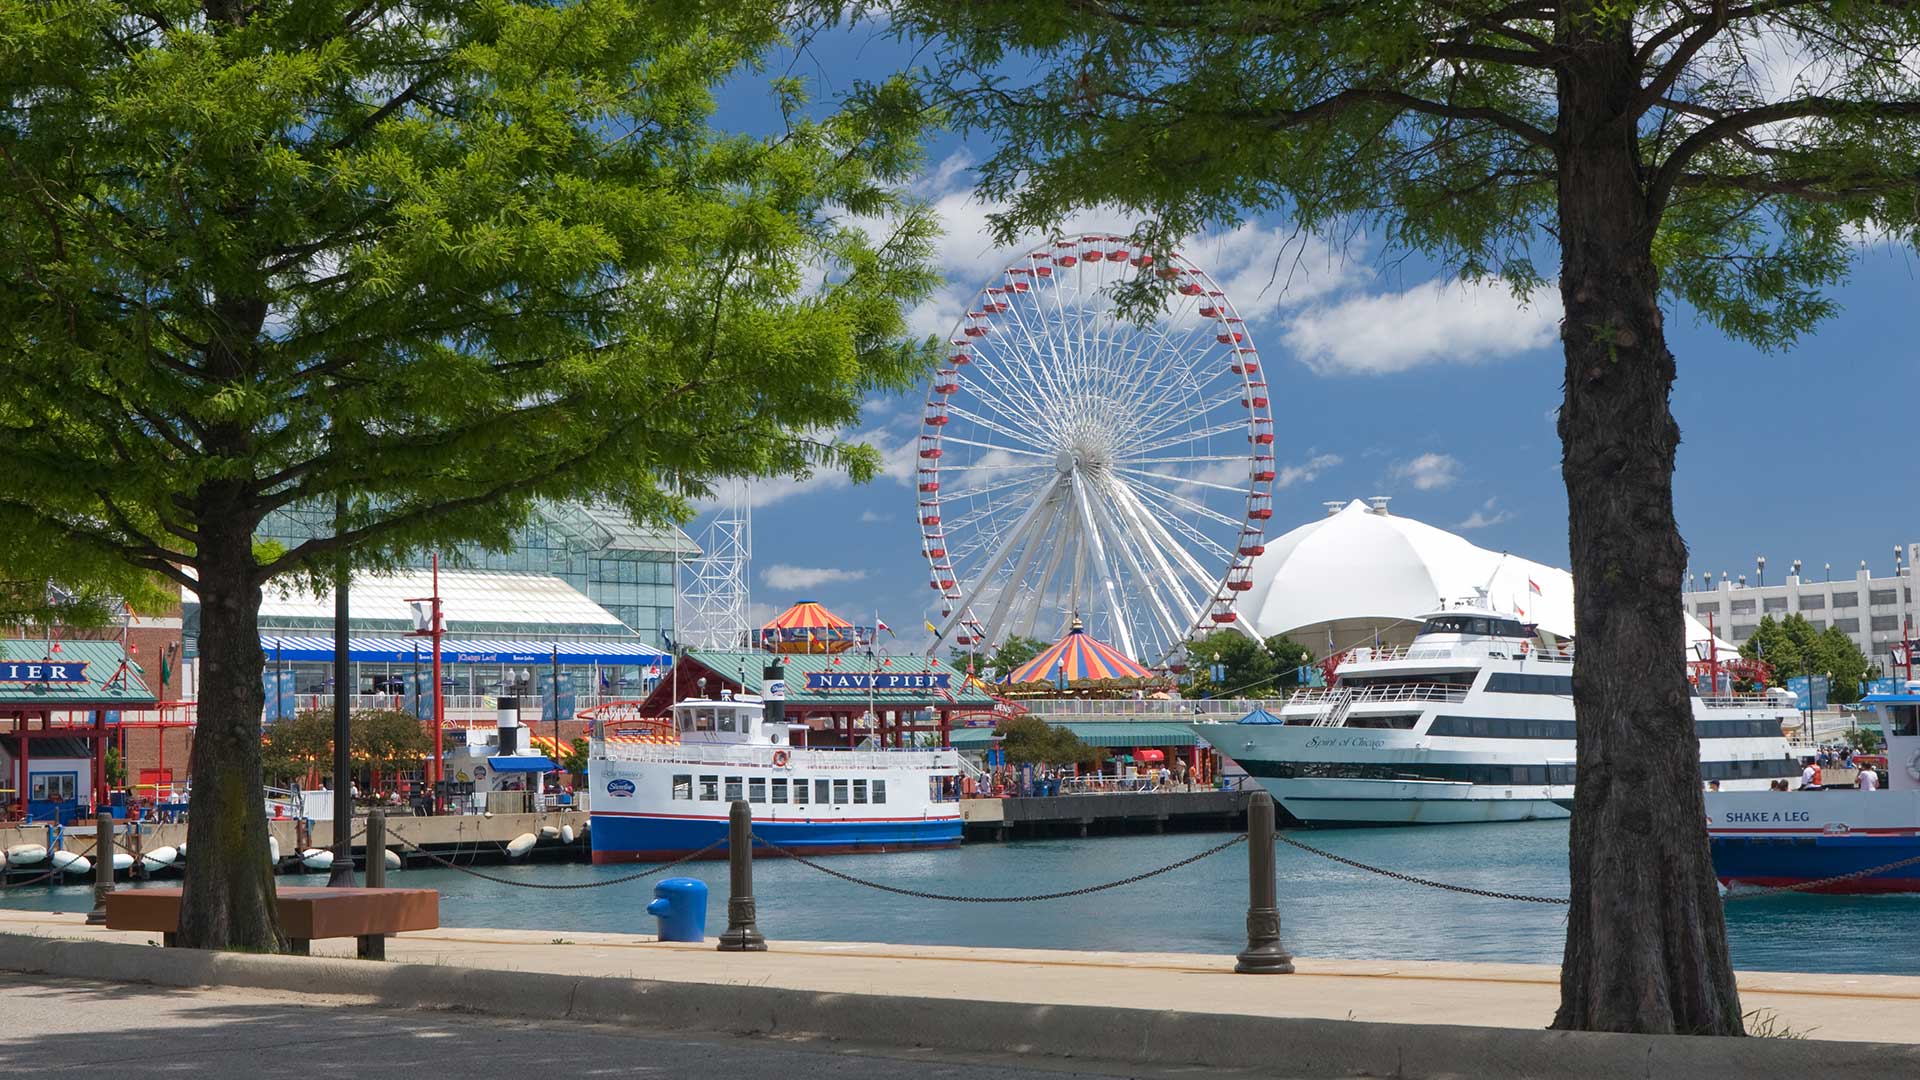 Looking at Chicago's Navy Pier from a sidewalk along the shore between two trees. The Ferris Wheel is seen centered on the pier in the distance. There are exposition structures on both sides and large boats in the water all around.